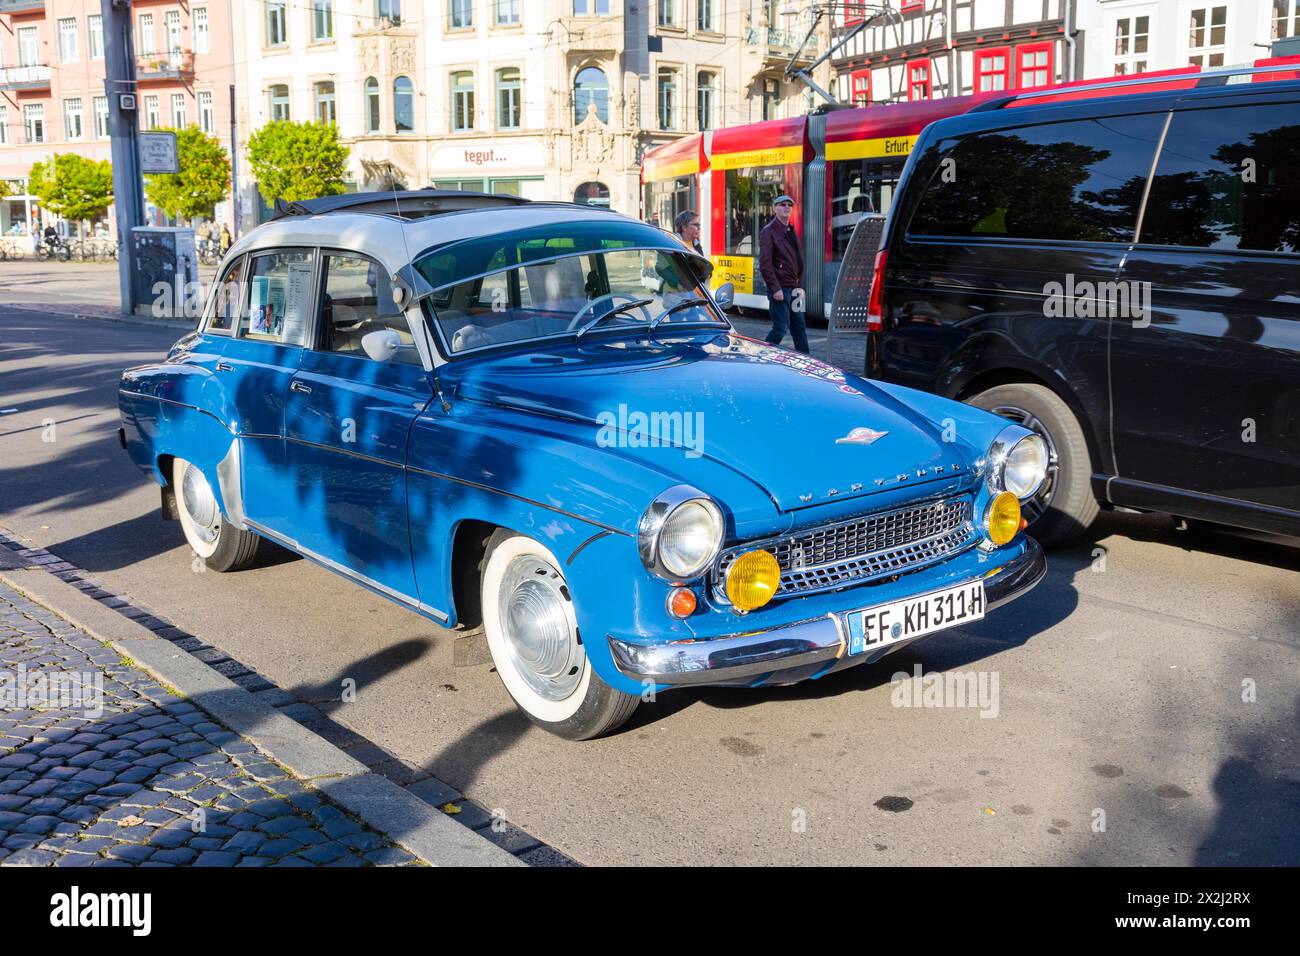 Wartburg 311, built in 1956, registered on 4 November 1957, first owner was Herbert Koefer, a well-known DEFA actor. Wartburg was the trade name of Stock Photo